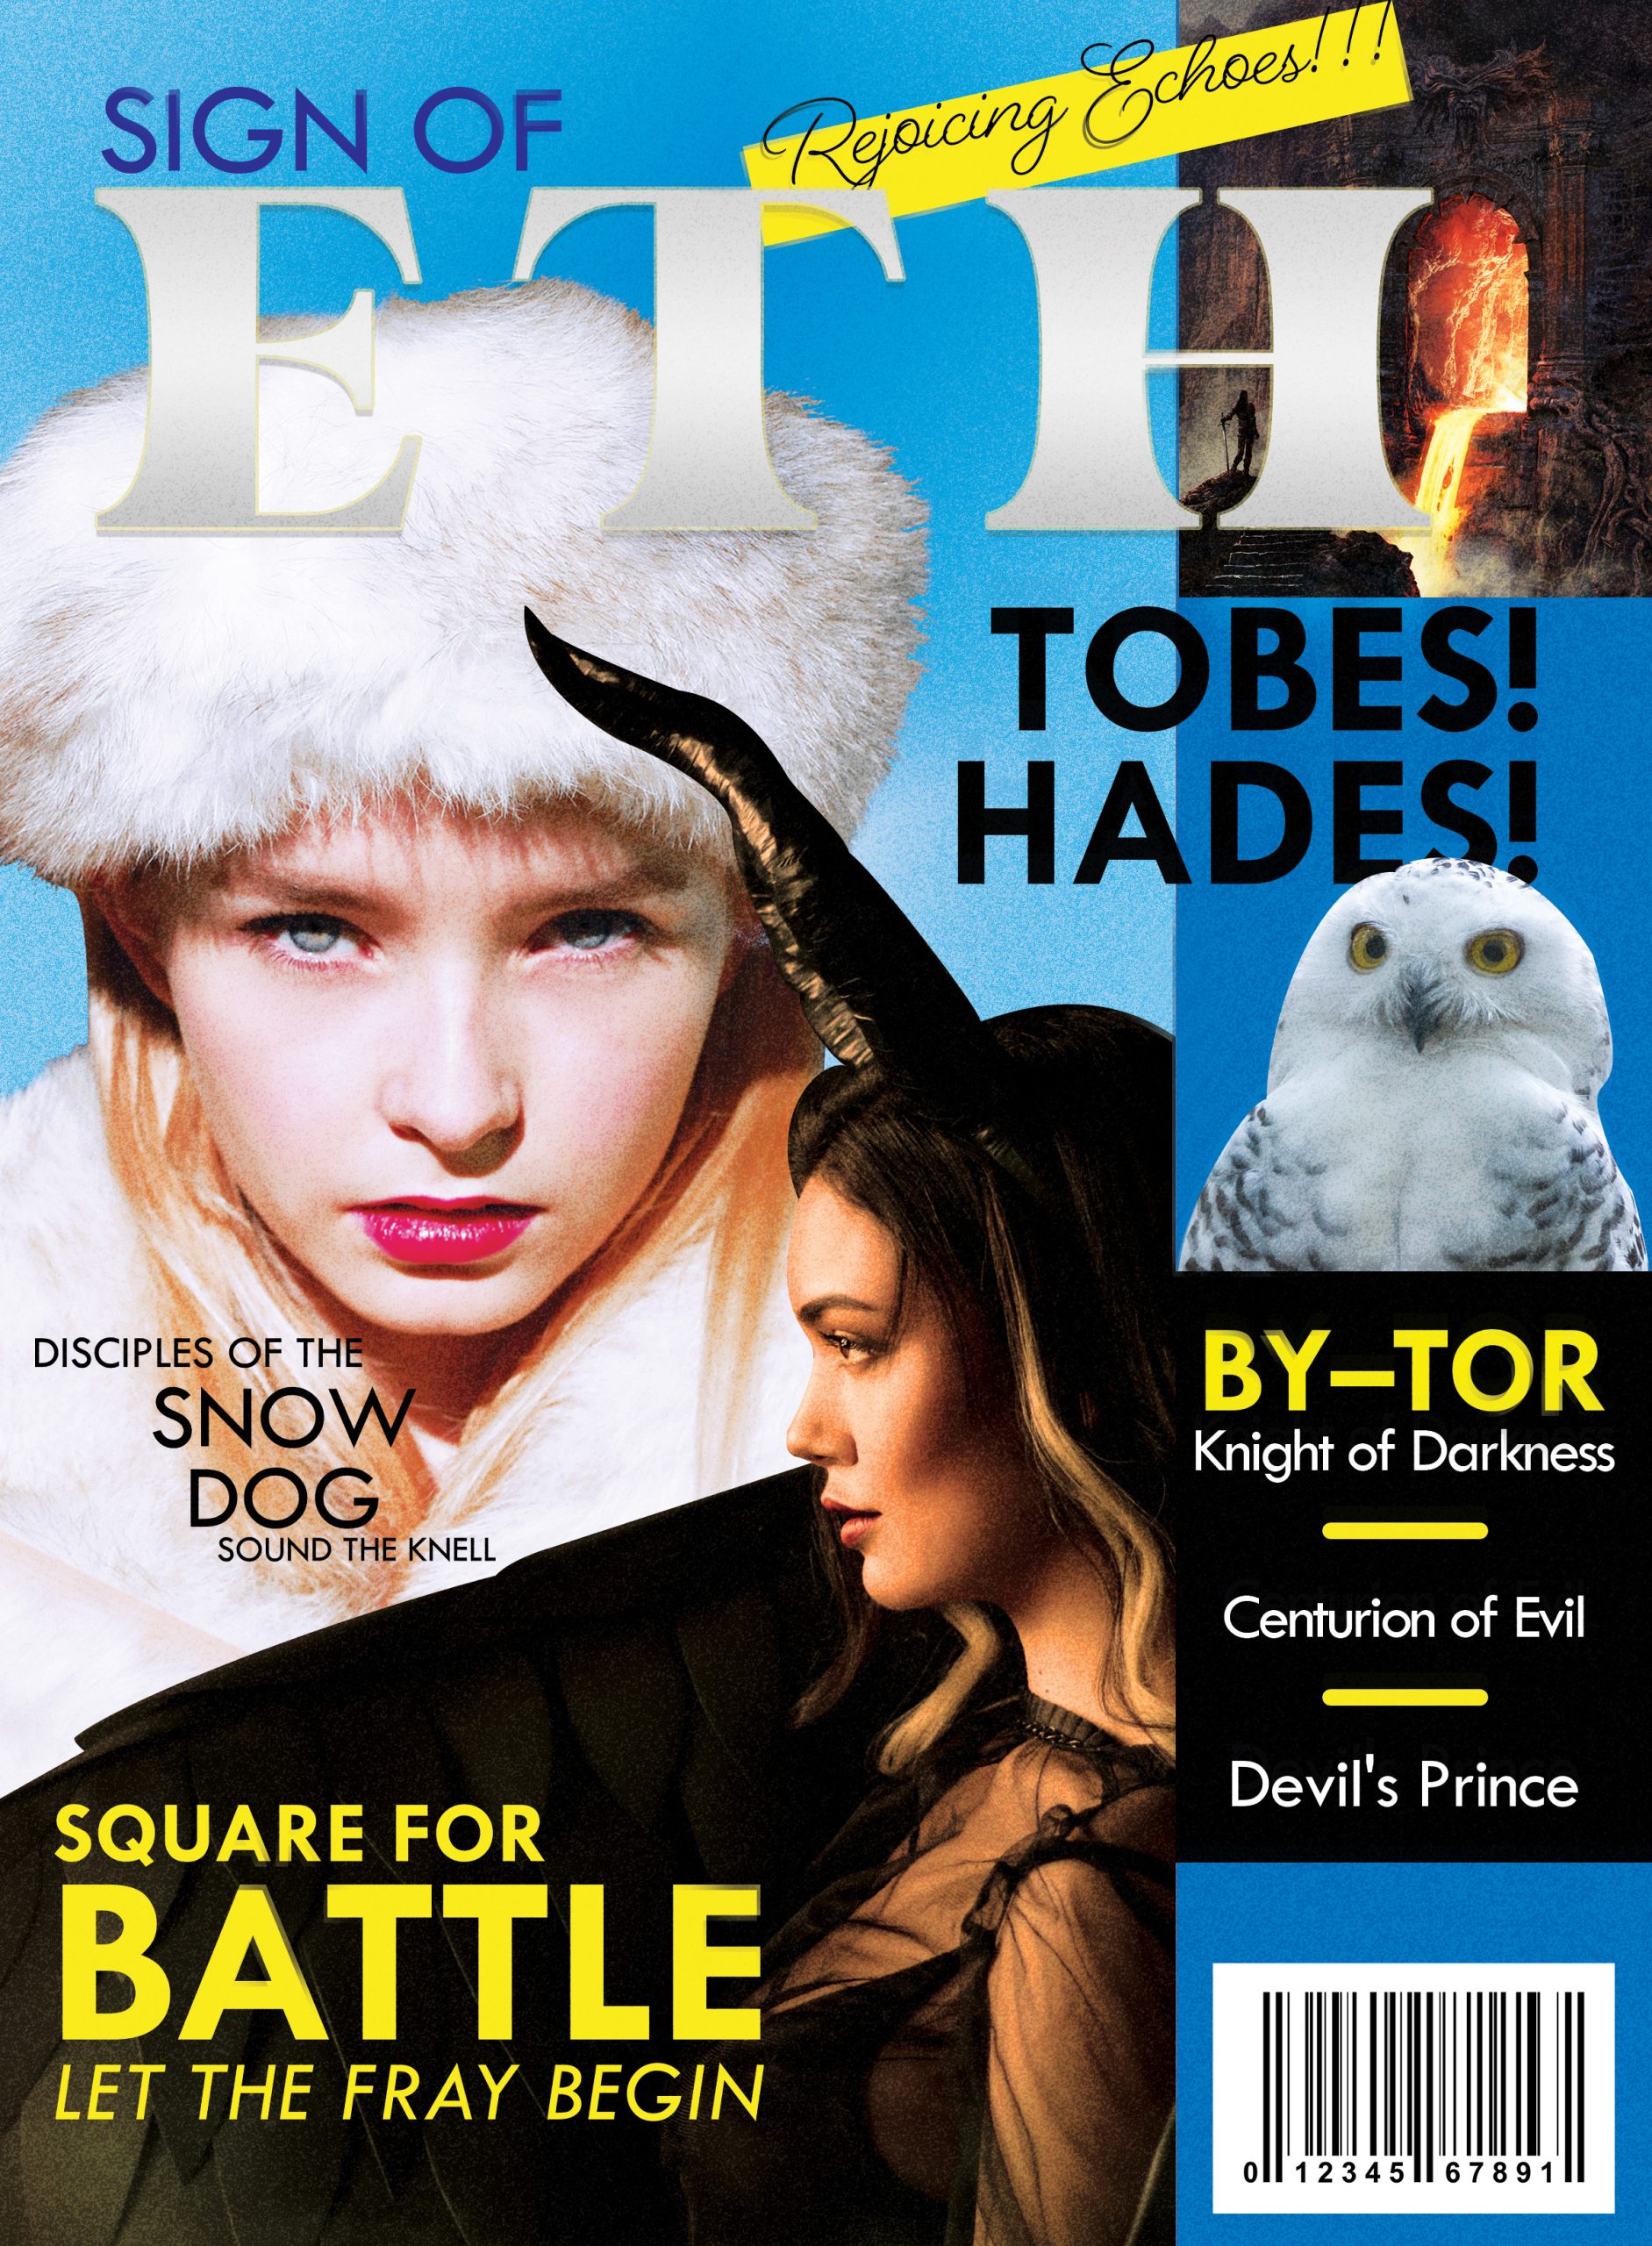 A magazine cover based on bytor and the snow dog